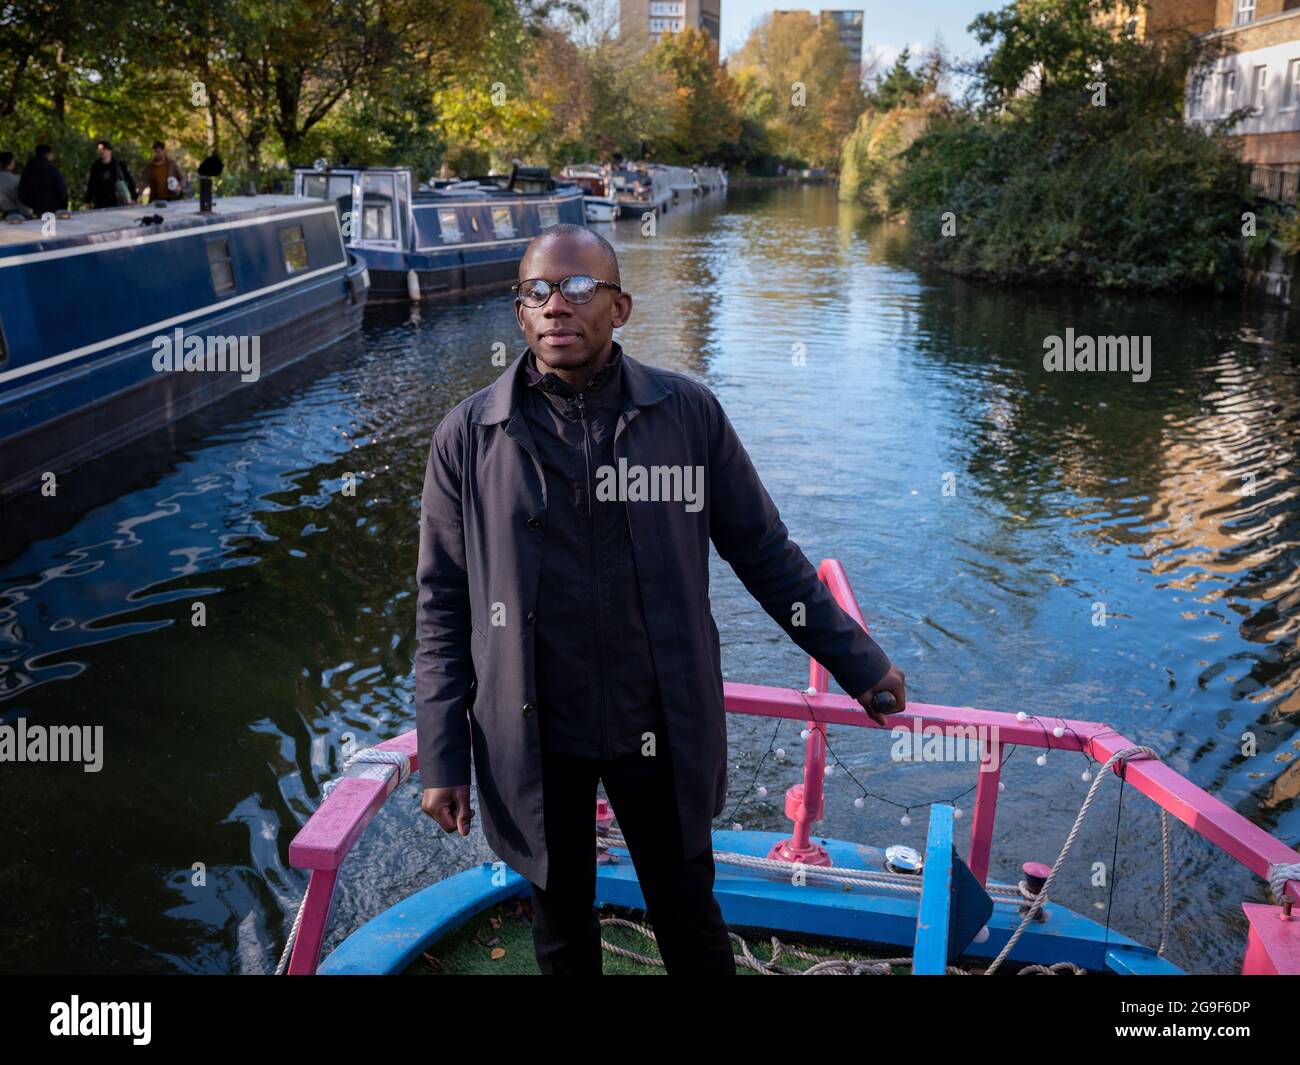 A black man steering a narrow boat with a tiller along the Regent’s Canal in Little Venice, London. Stock Photo